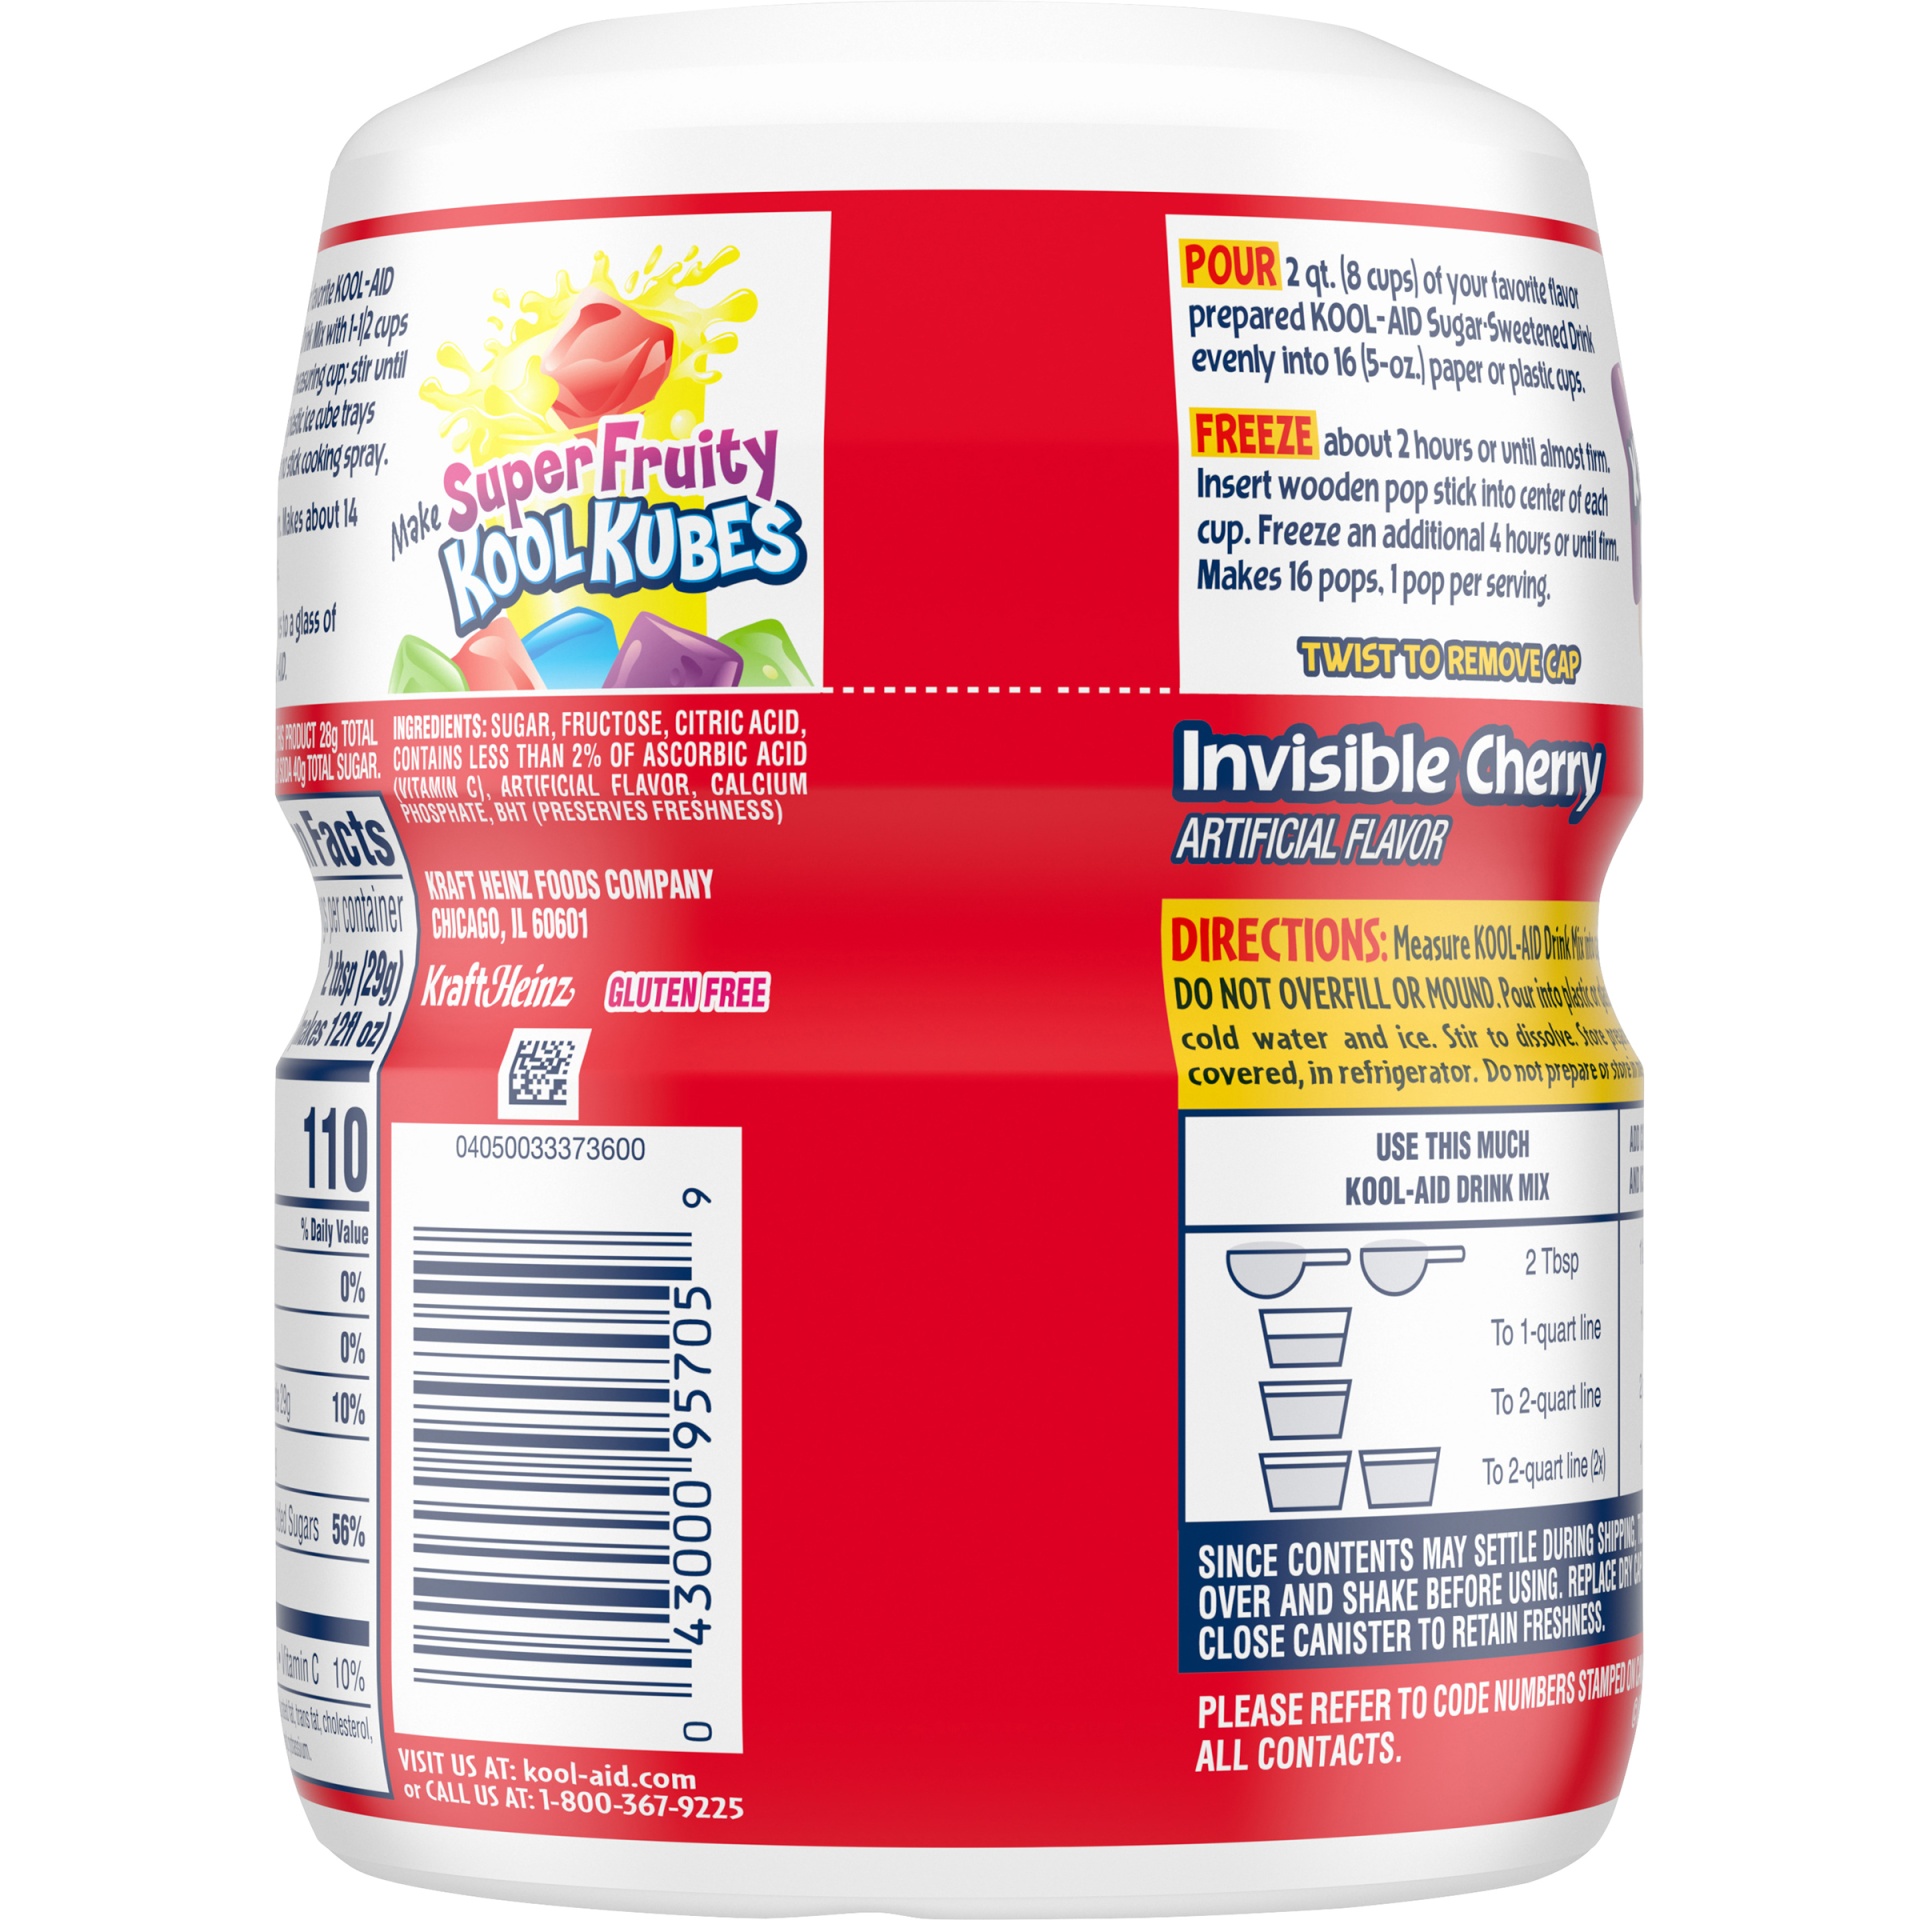 slide 5 of 6, Kool-Aid Invisible Sugar-Sweetened Invisible Cherry Artificially Flavored Powdered Soft Drink Mix ister, 19 oz